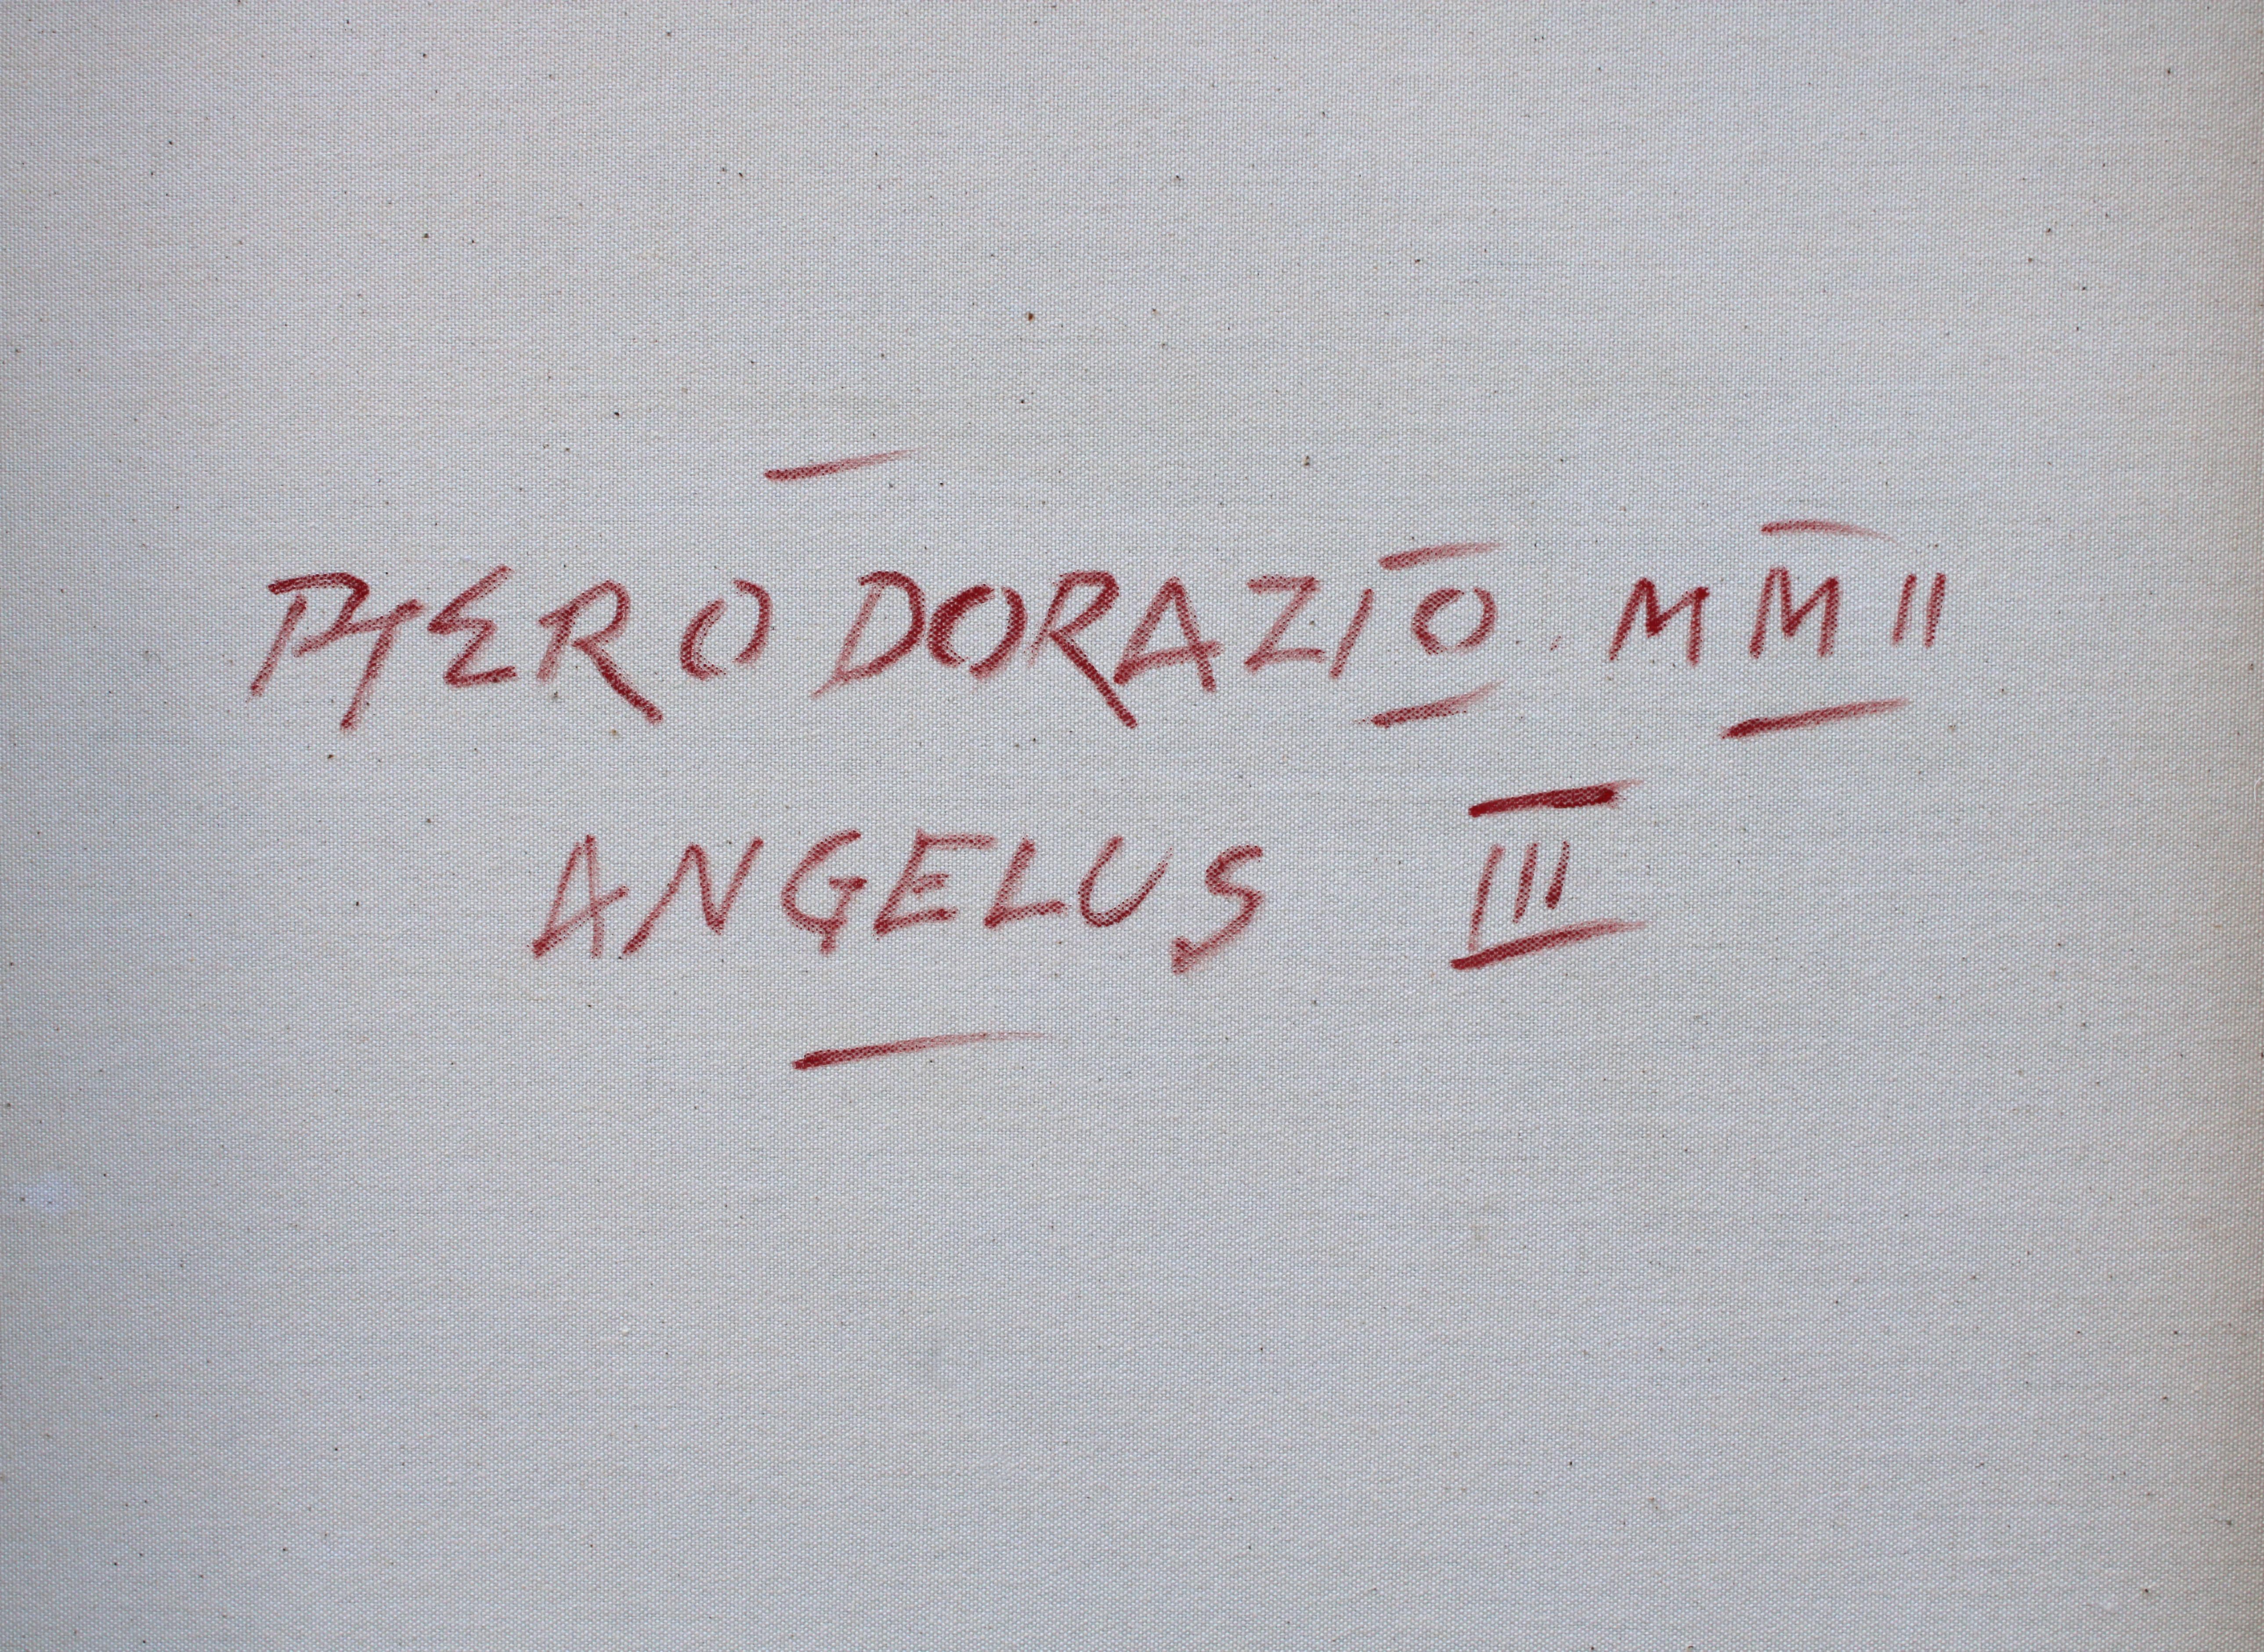 ANGELUS III
2002   
Oil on canvas 
Signed and dated on the back
Work registered with the Studio Piero Dorazio Photo certificate issued by the Studio Piero Dorazio